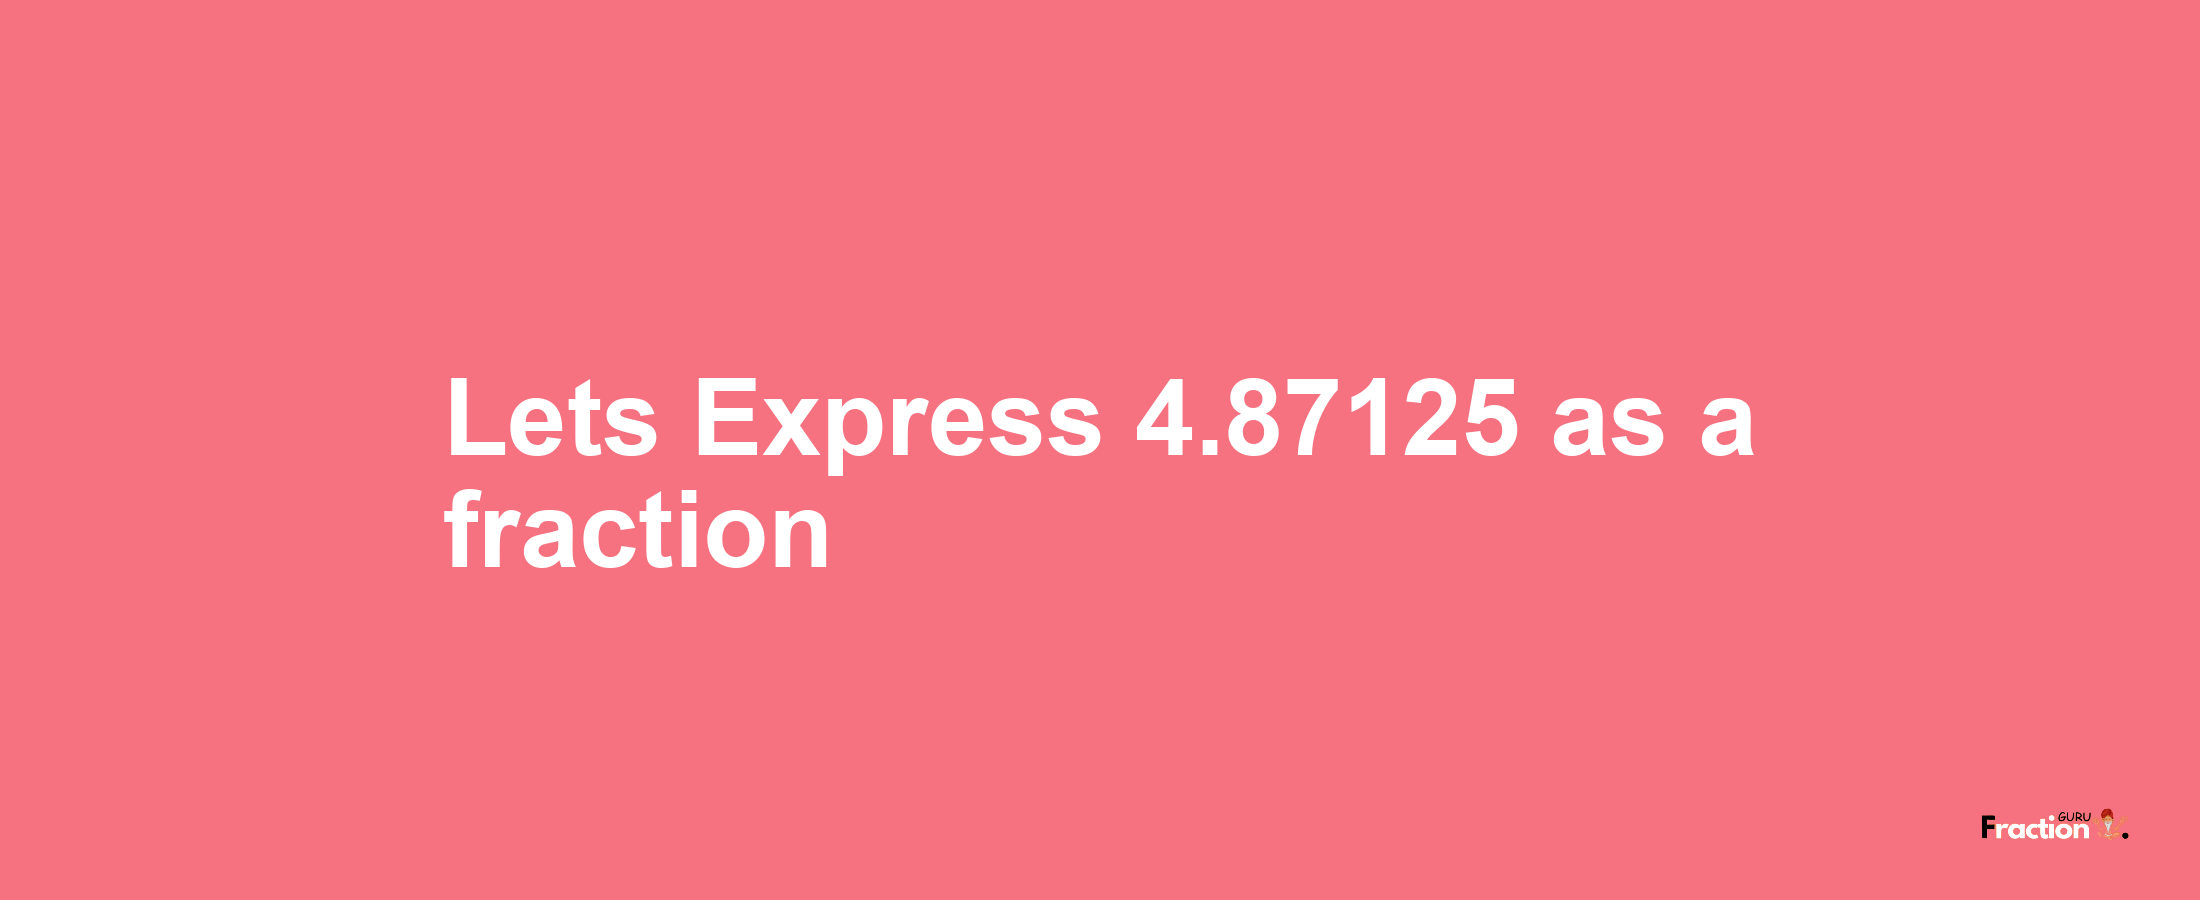 Lets Express 4.87125 as afraction